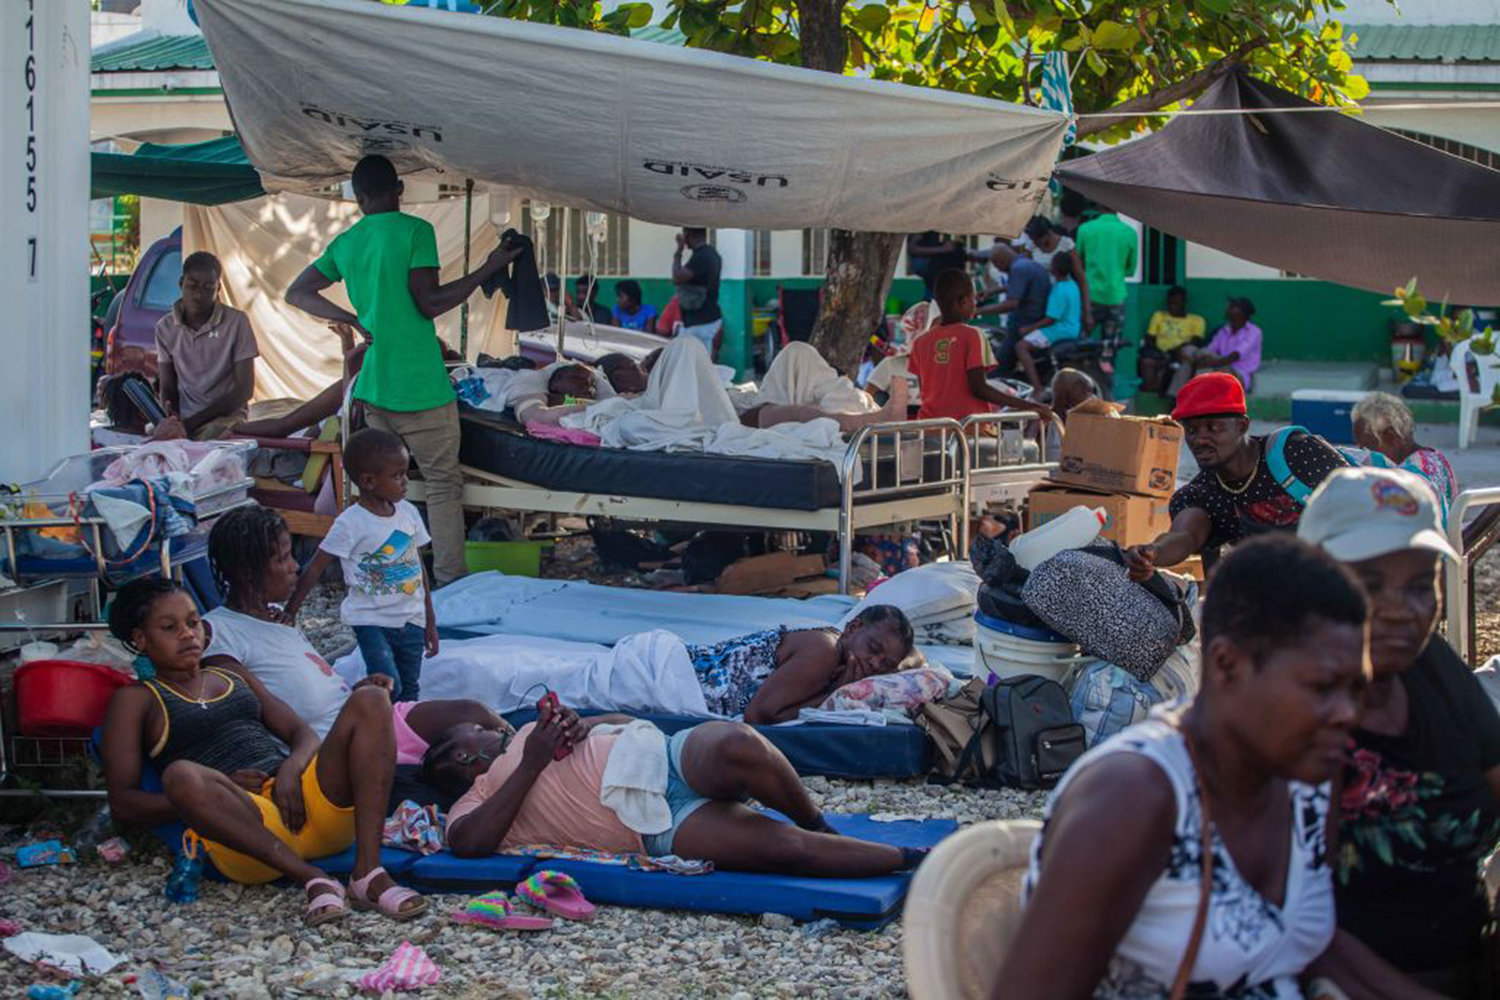 Haitians rest outdoors after a 7.2-magnitude earthquake on August 15, 2021 in Les Cayes, Haiti. Rescue workers have been working among destroyed homes since the quake struck on Saturday and so far there are 1,297 dead and 5.700 wounded. The epicenter was located about 100 miles west of the capital city Port-au-Prince. (Richard Pierrin/Getty Images/TNS)